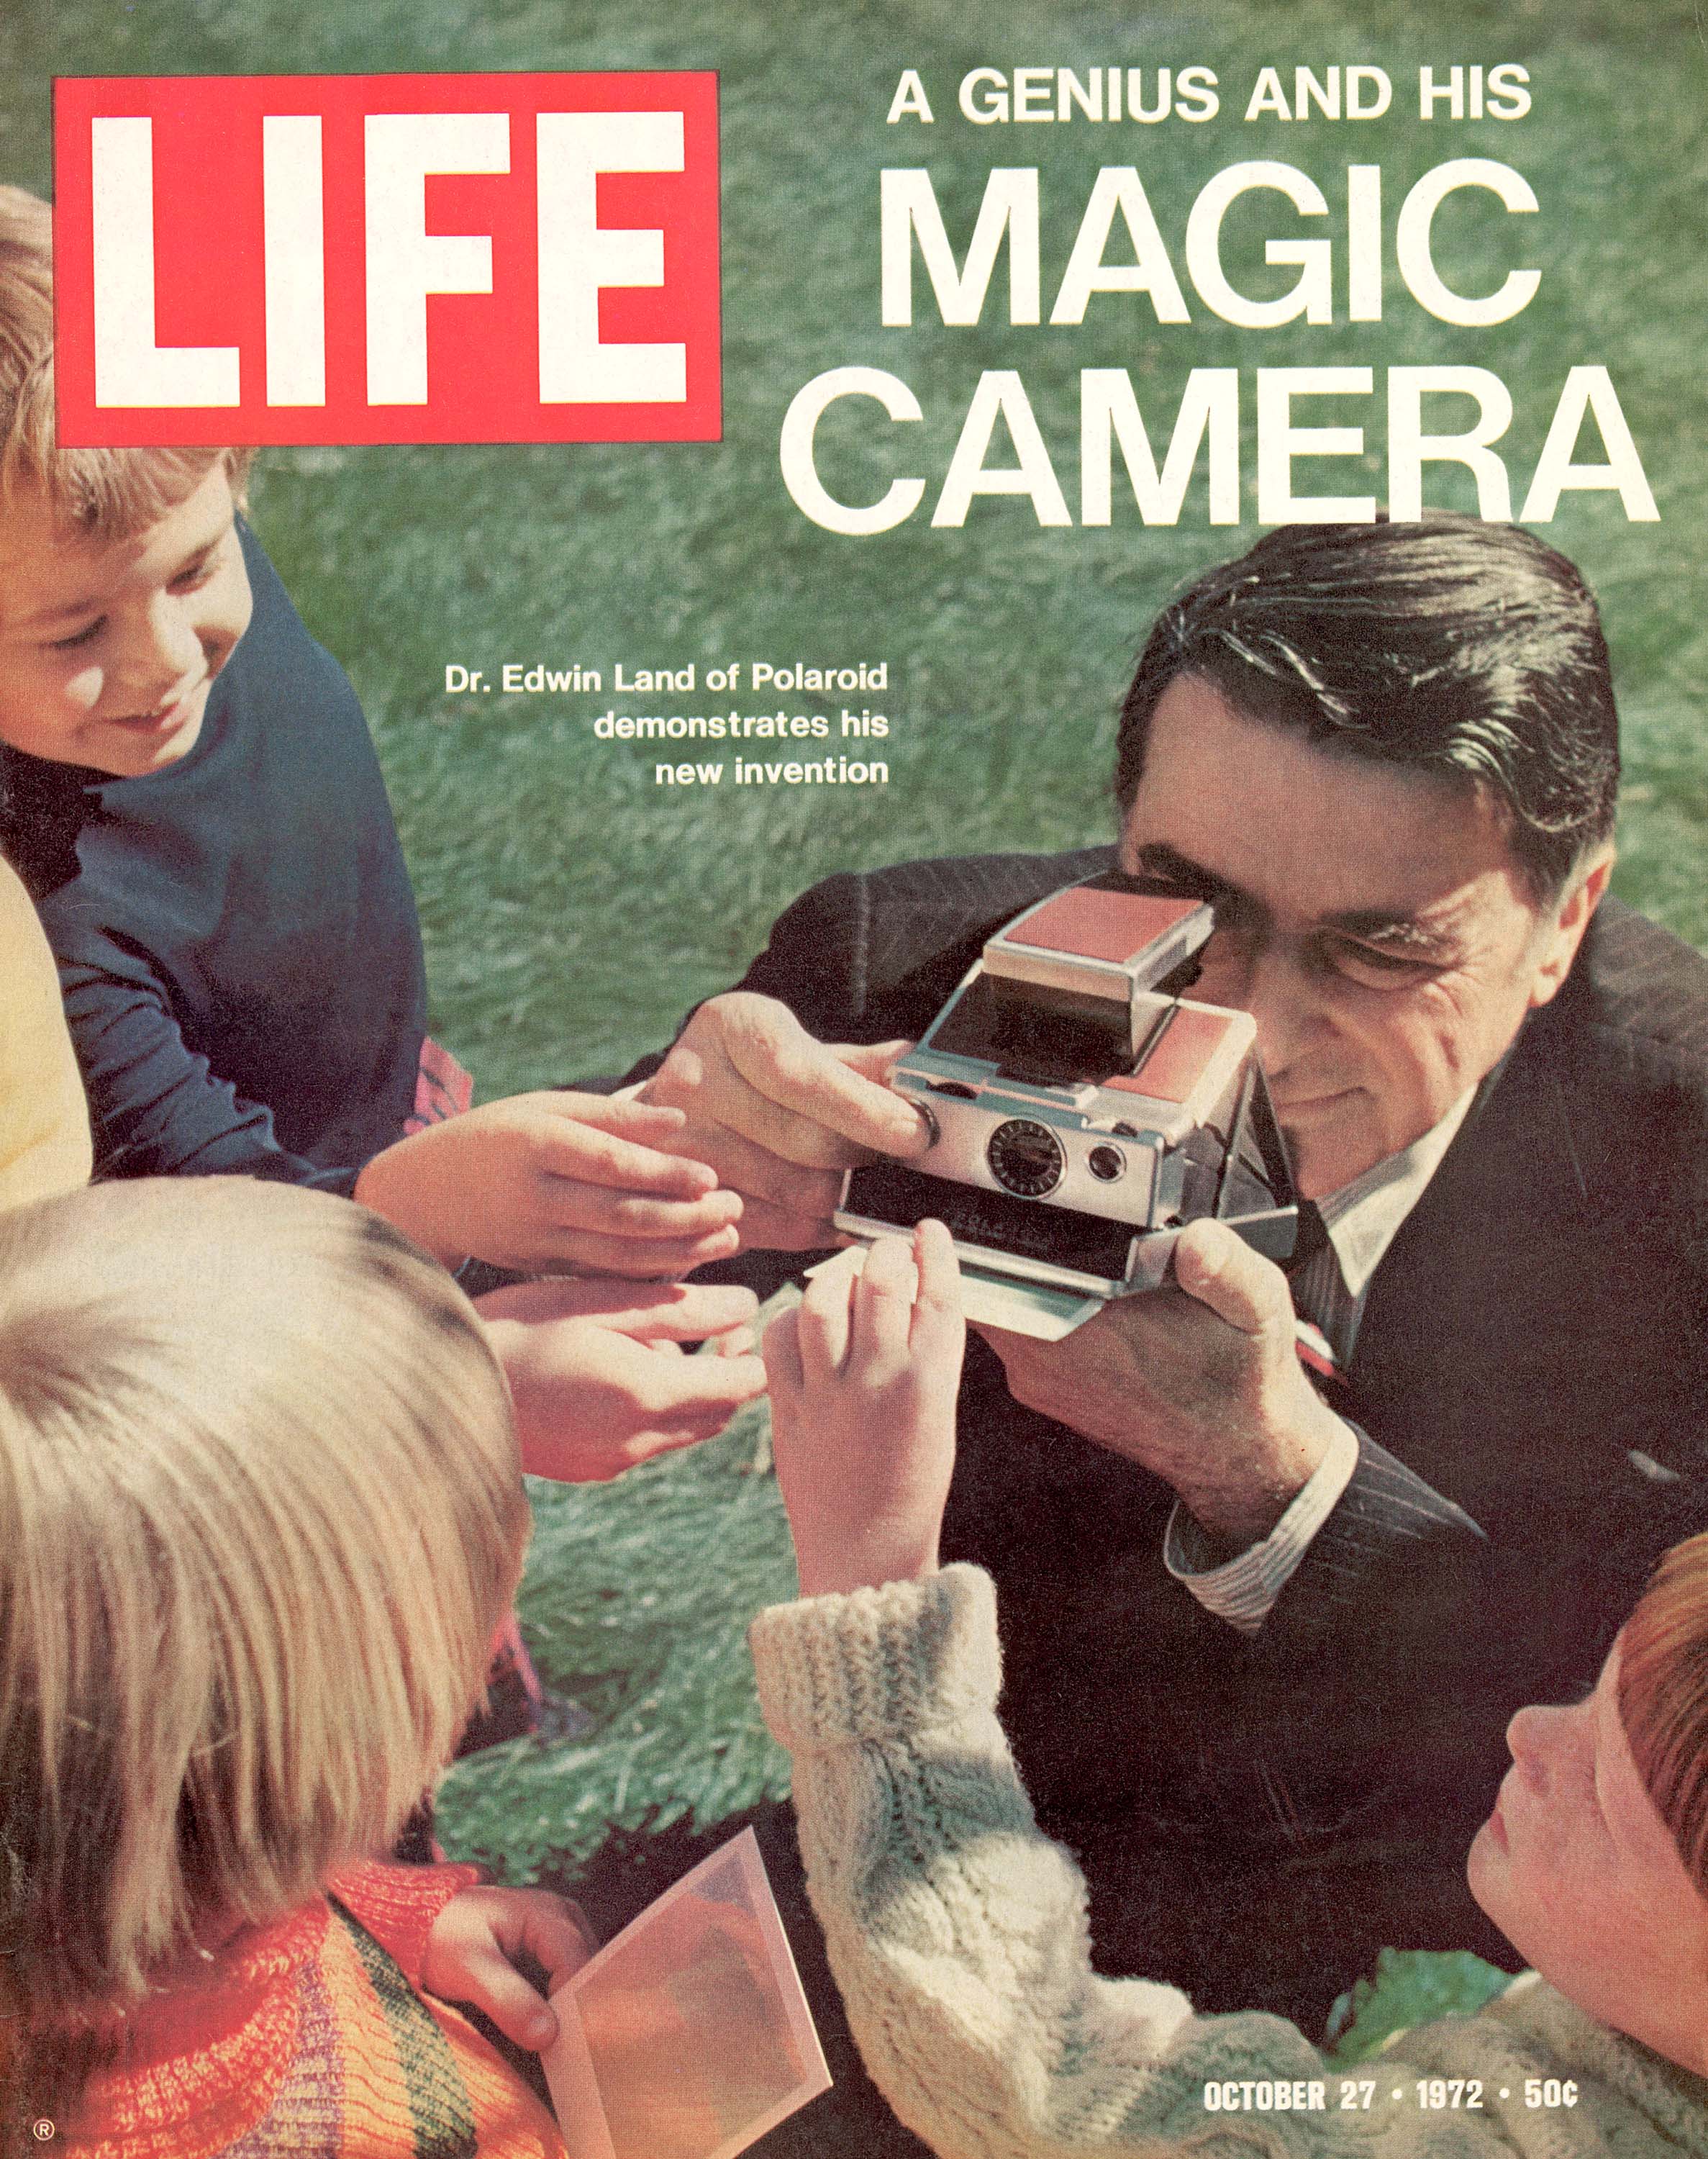 October 27, 1972 cover of LIFE magazine